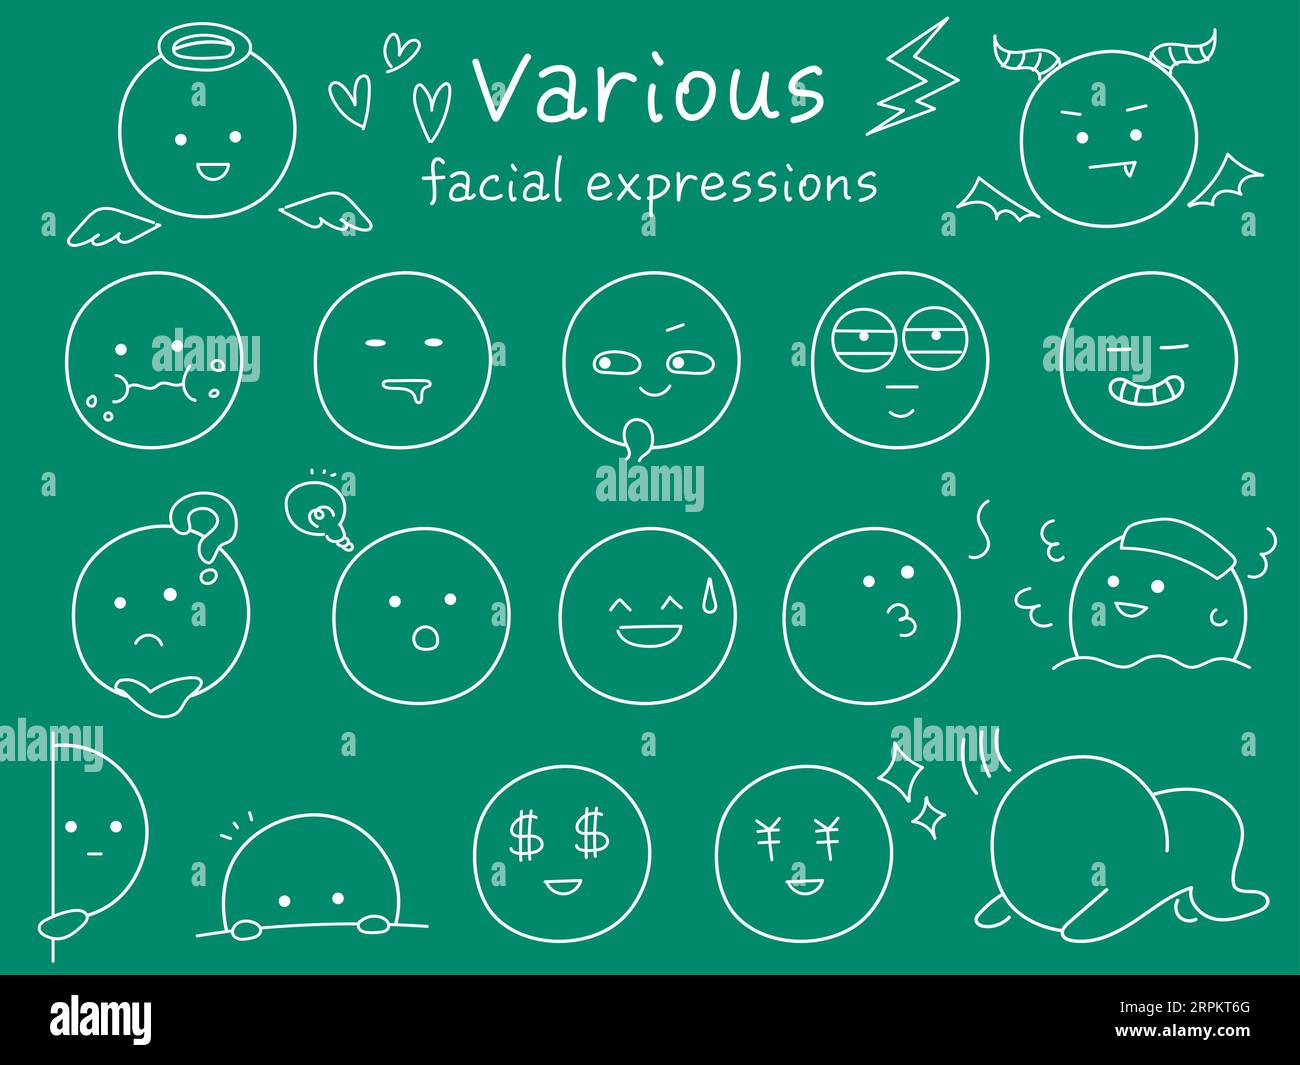 Simple and cute icon set of various facial expressions. White line drawing with hand-drawn touch.  Collection of funny emojis. Stock Vector